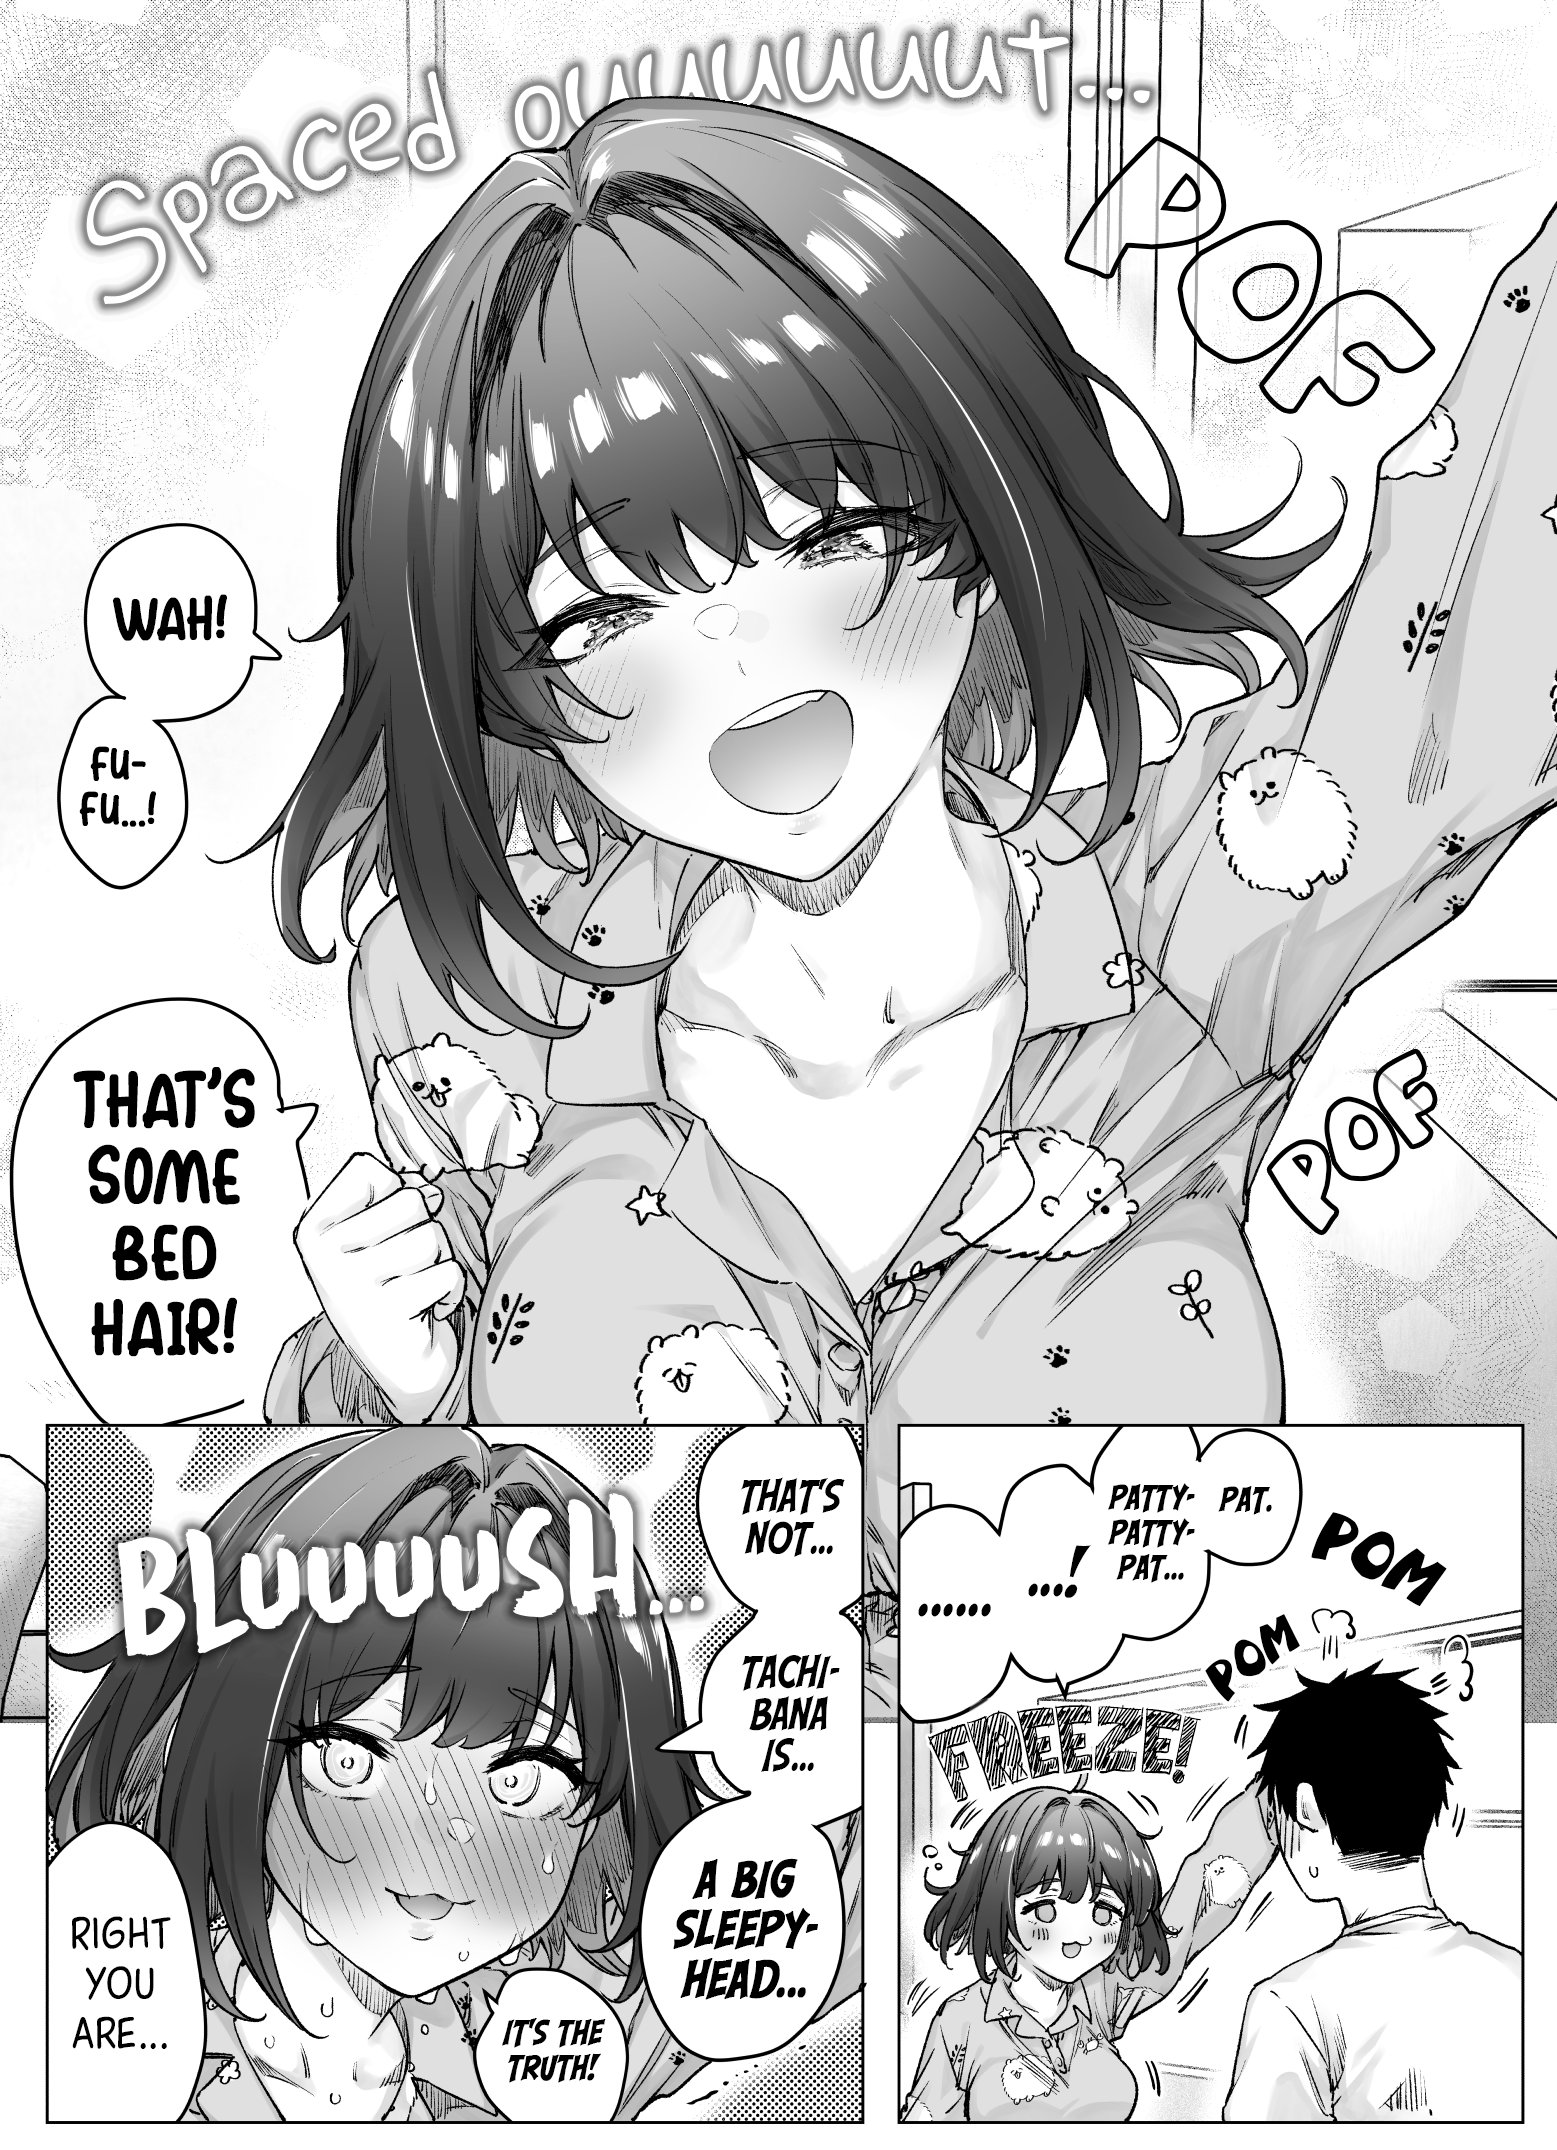 DISC] The Tsundere-chan Who's Communicating Her Love - Day 54 by